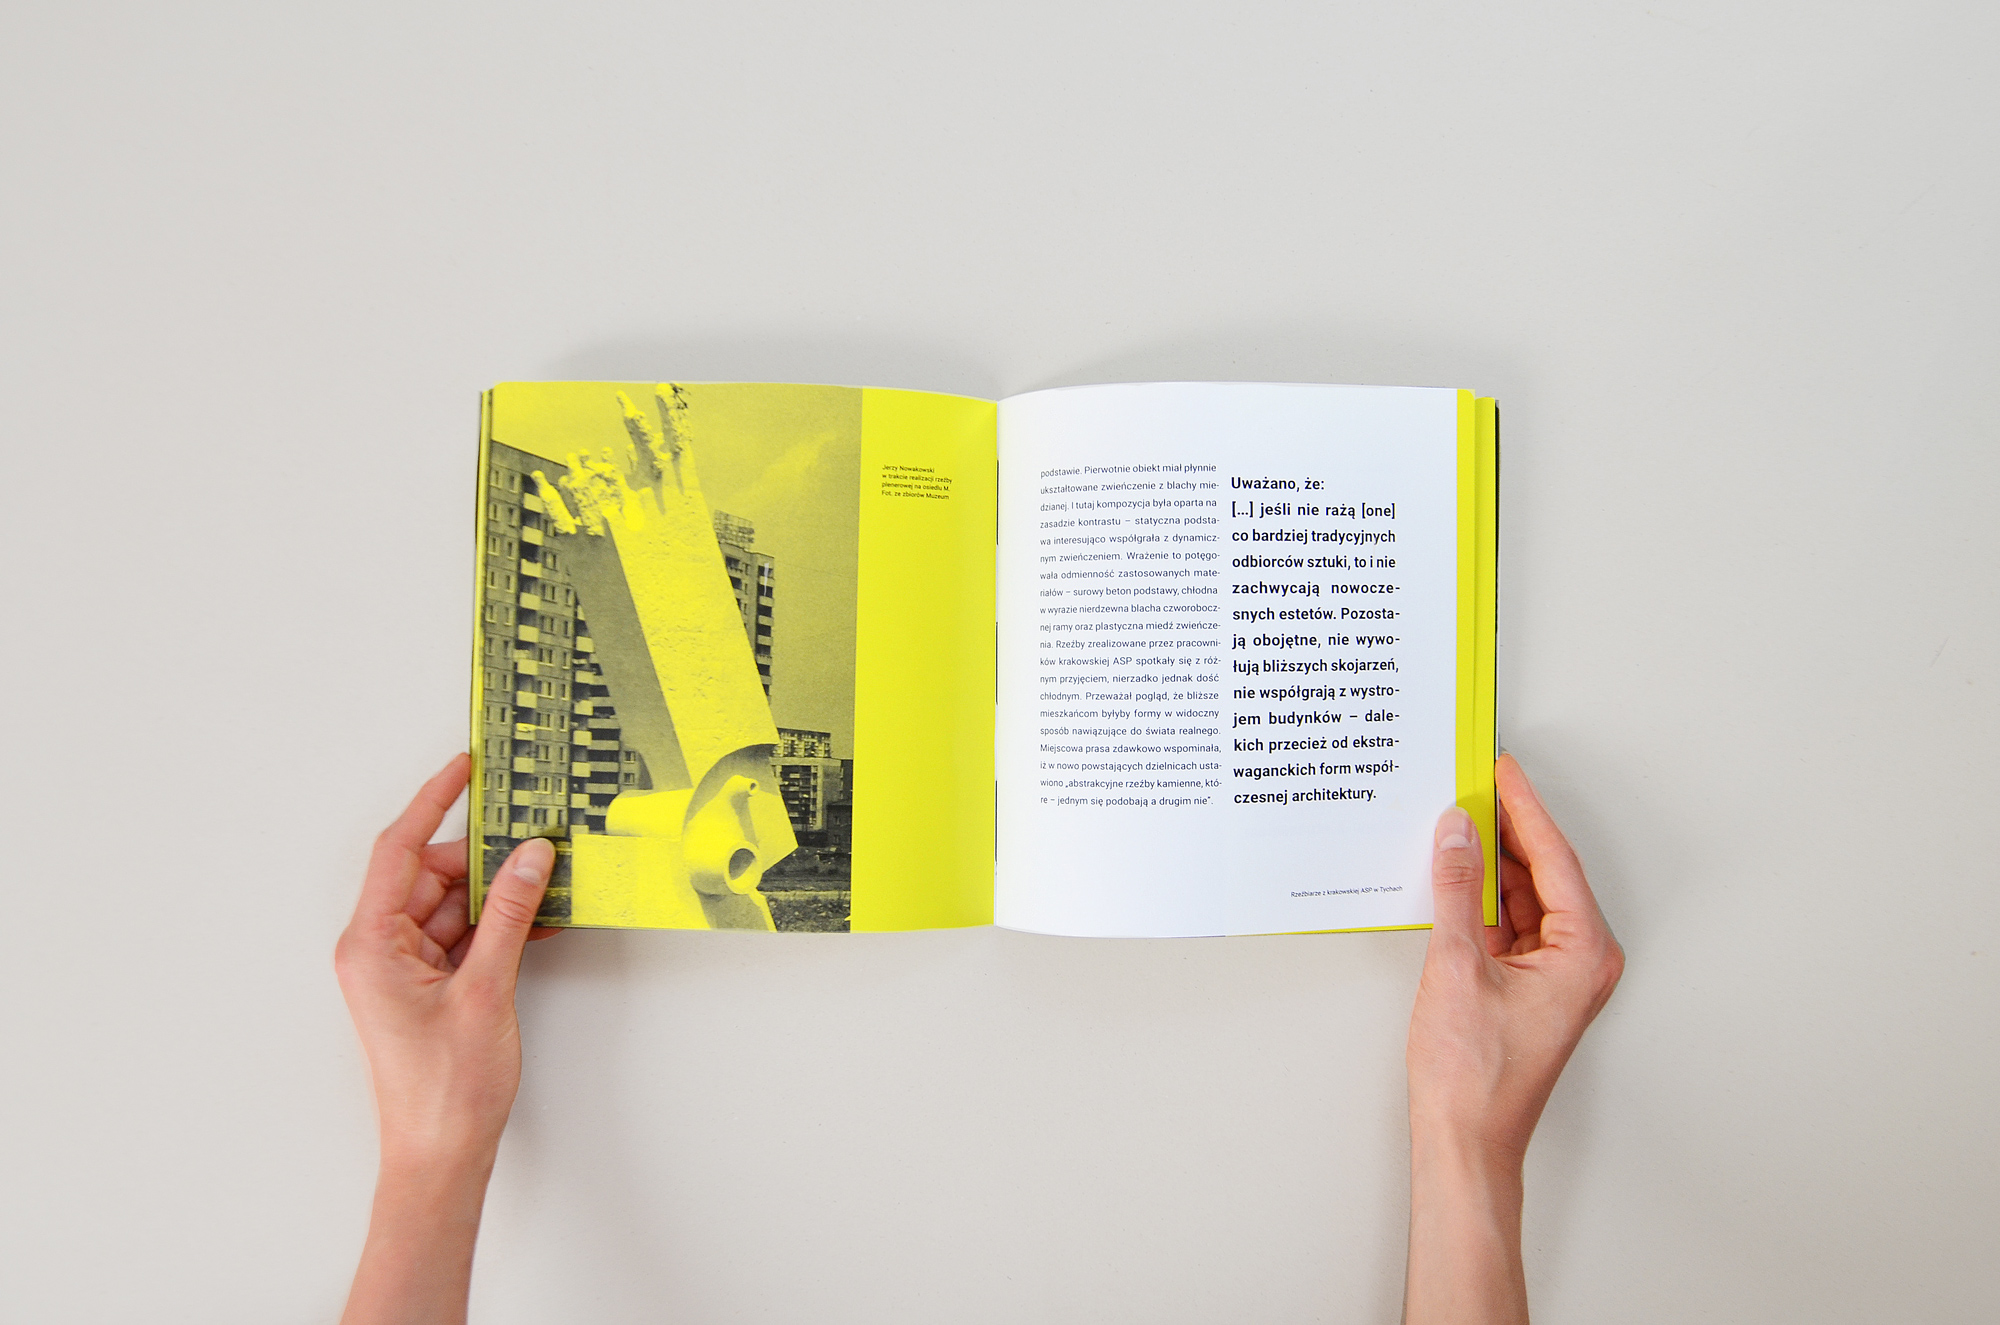 Publication design - contrast, typography, vivid colour. I played with contrast in typography and colors - black and vivid yellow.